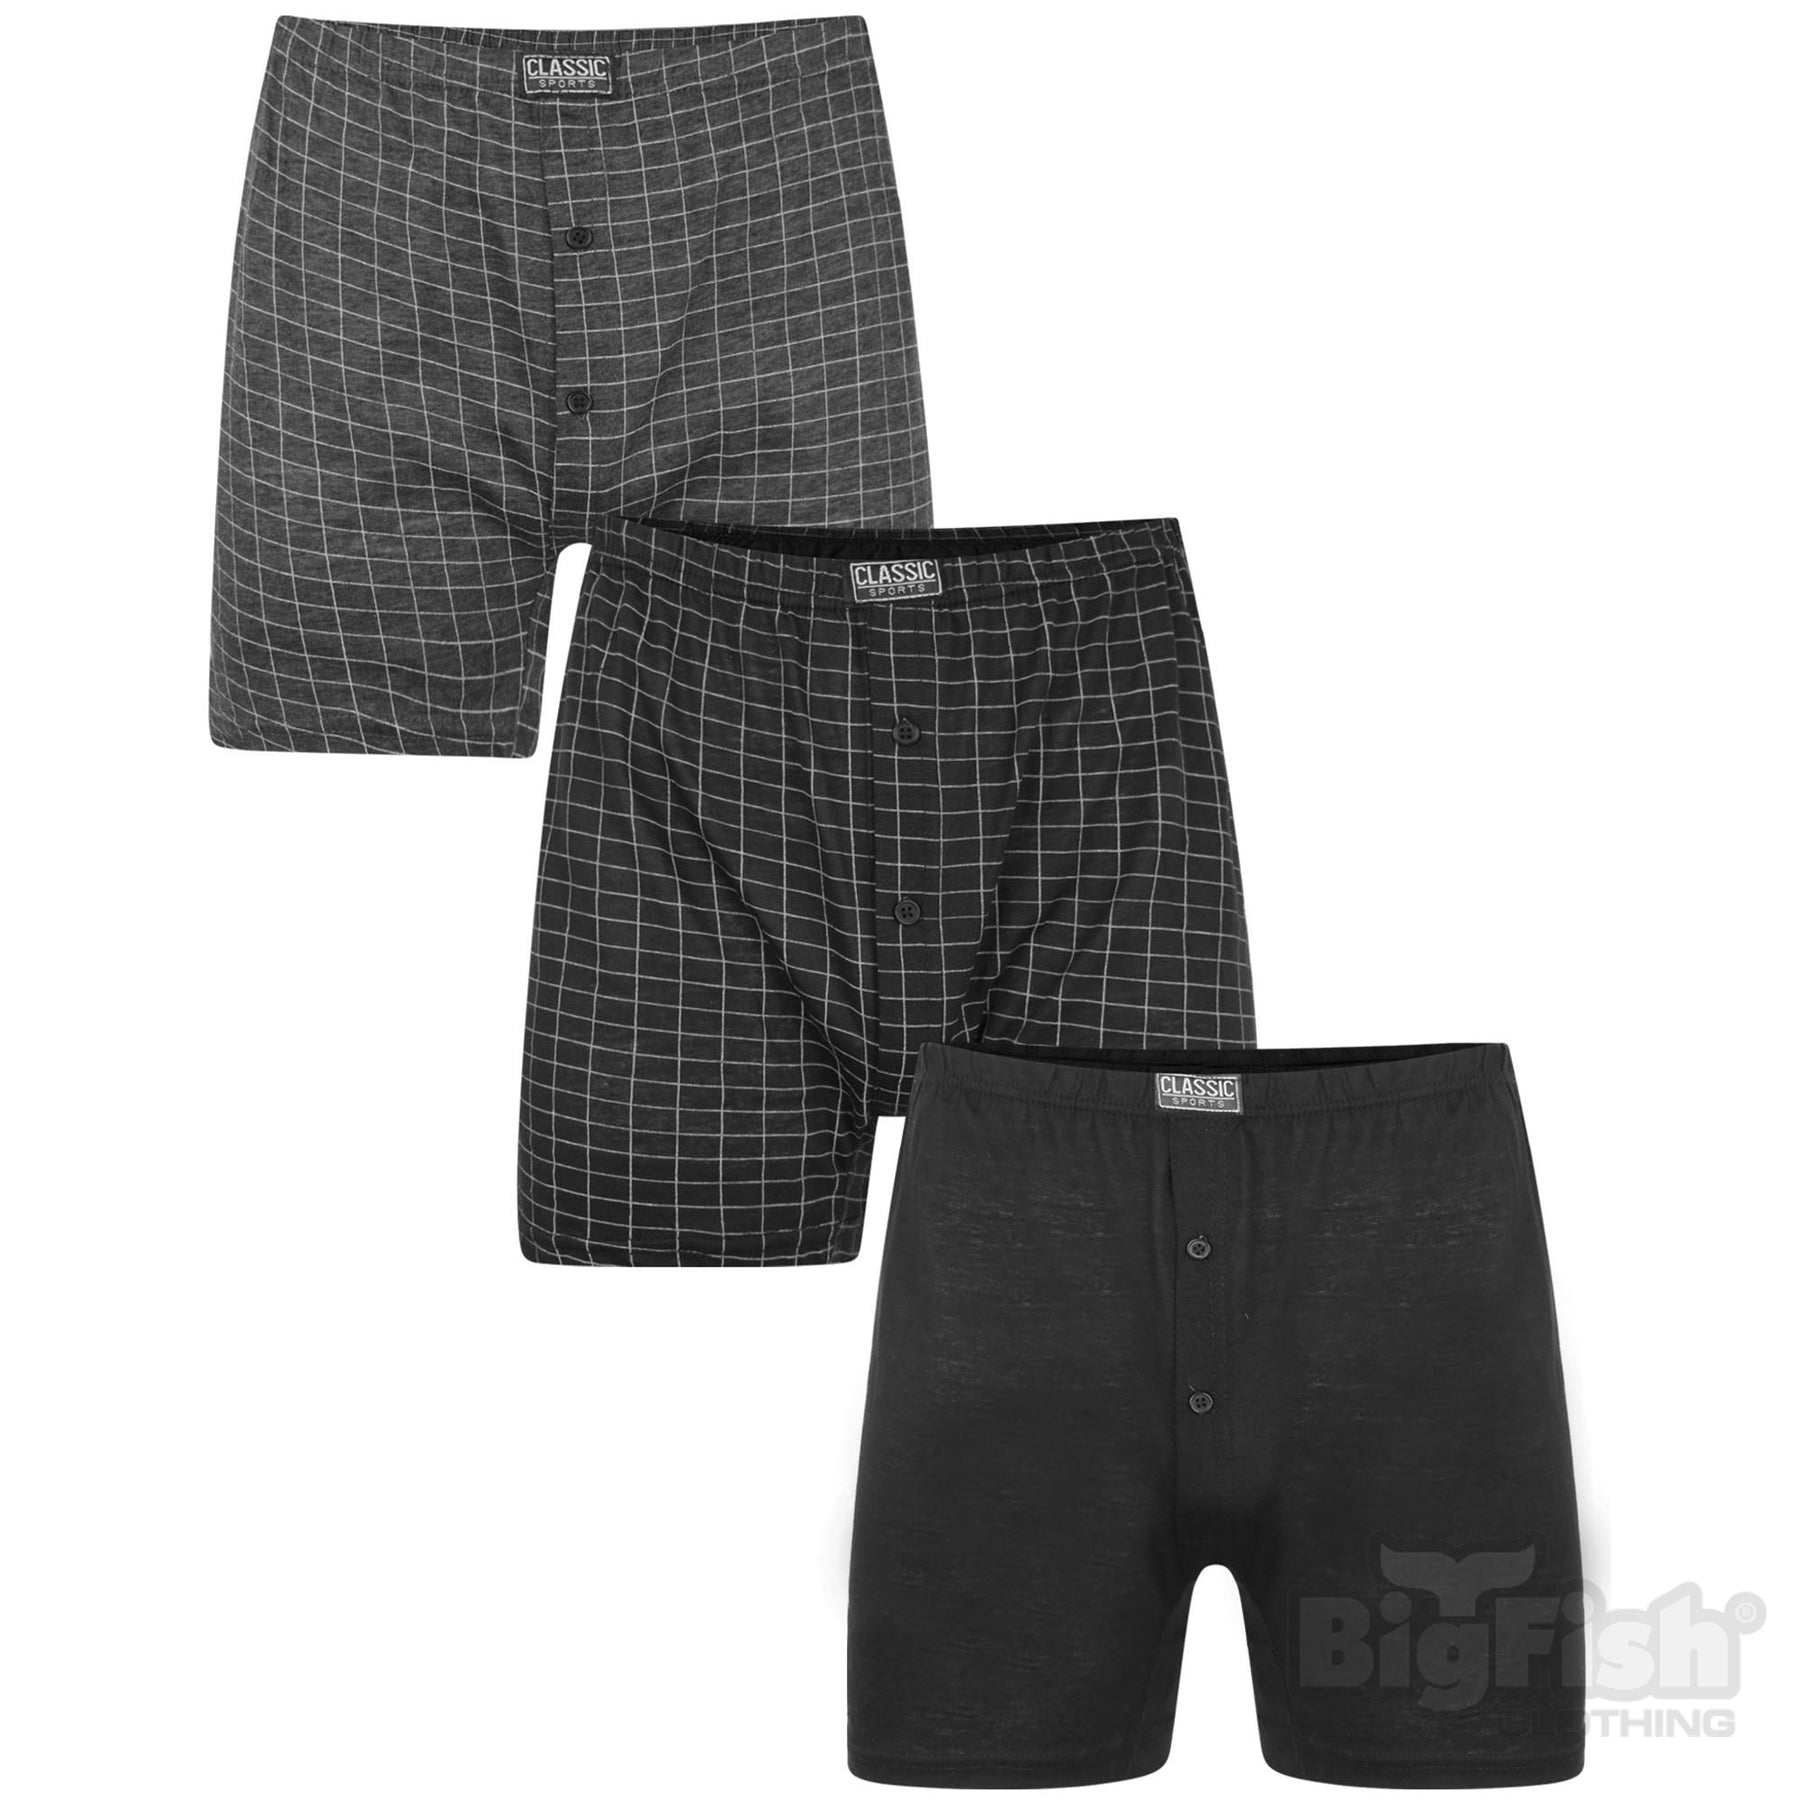 Classic Sports 3 Pack Boxers